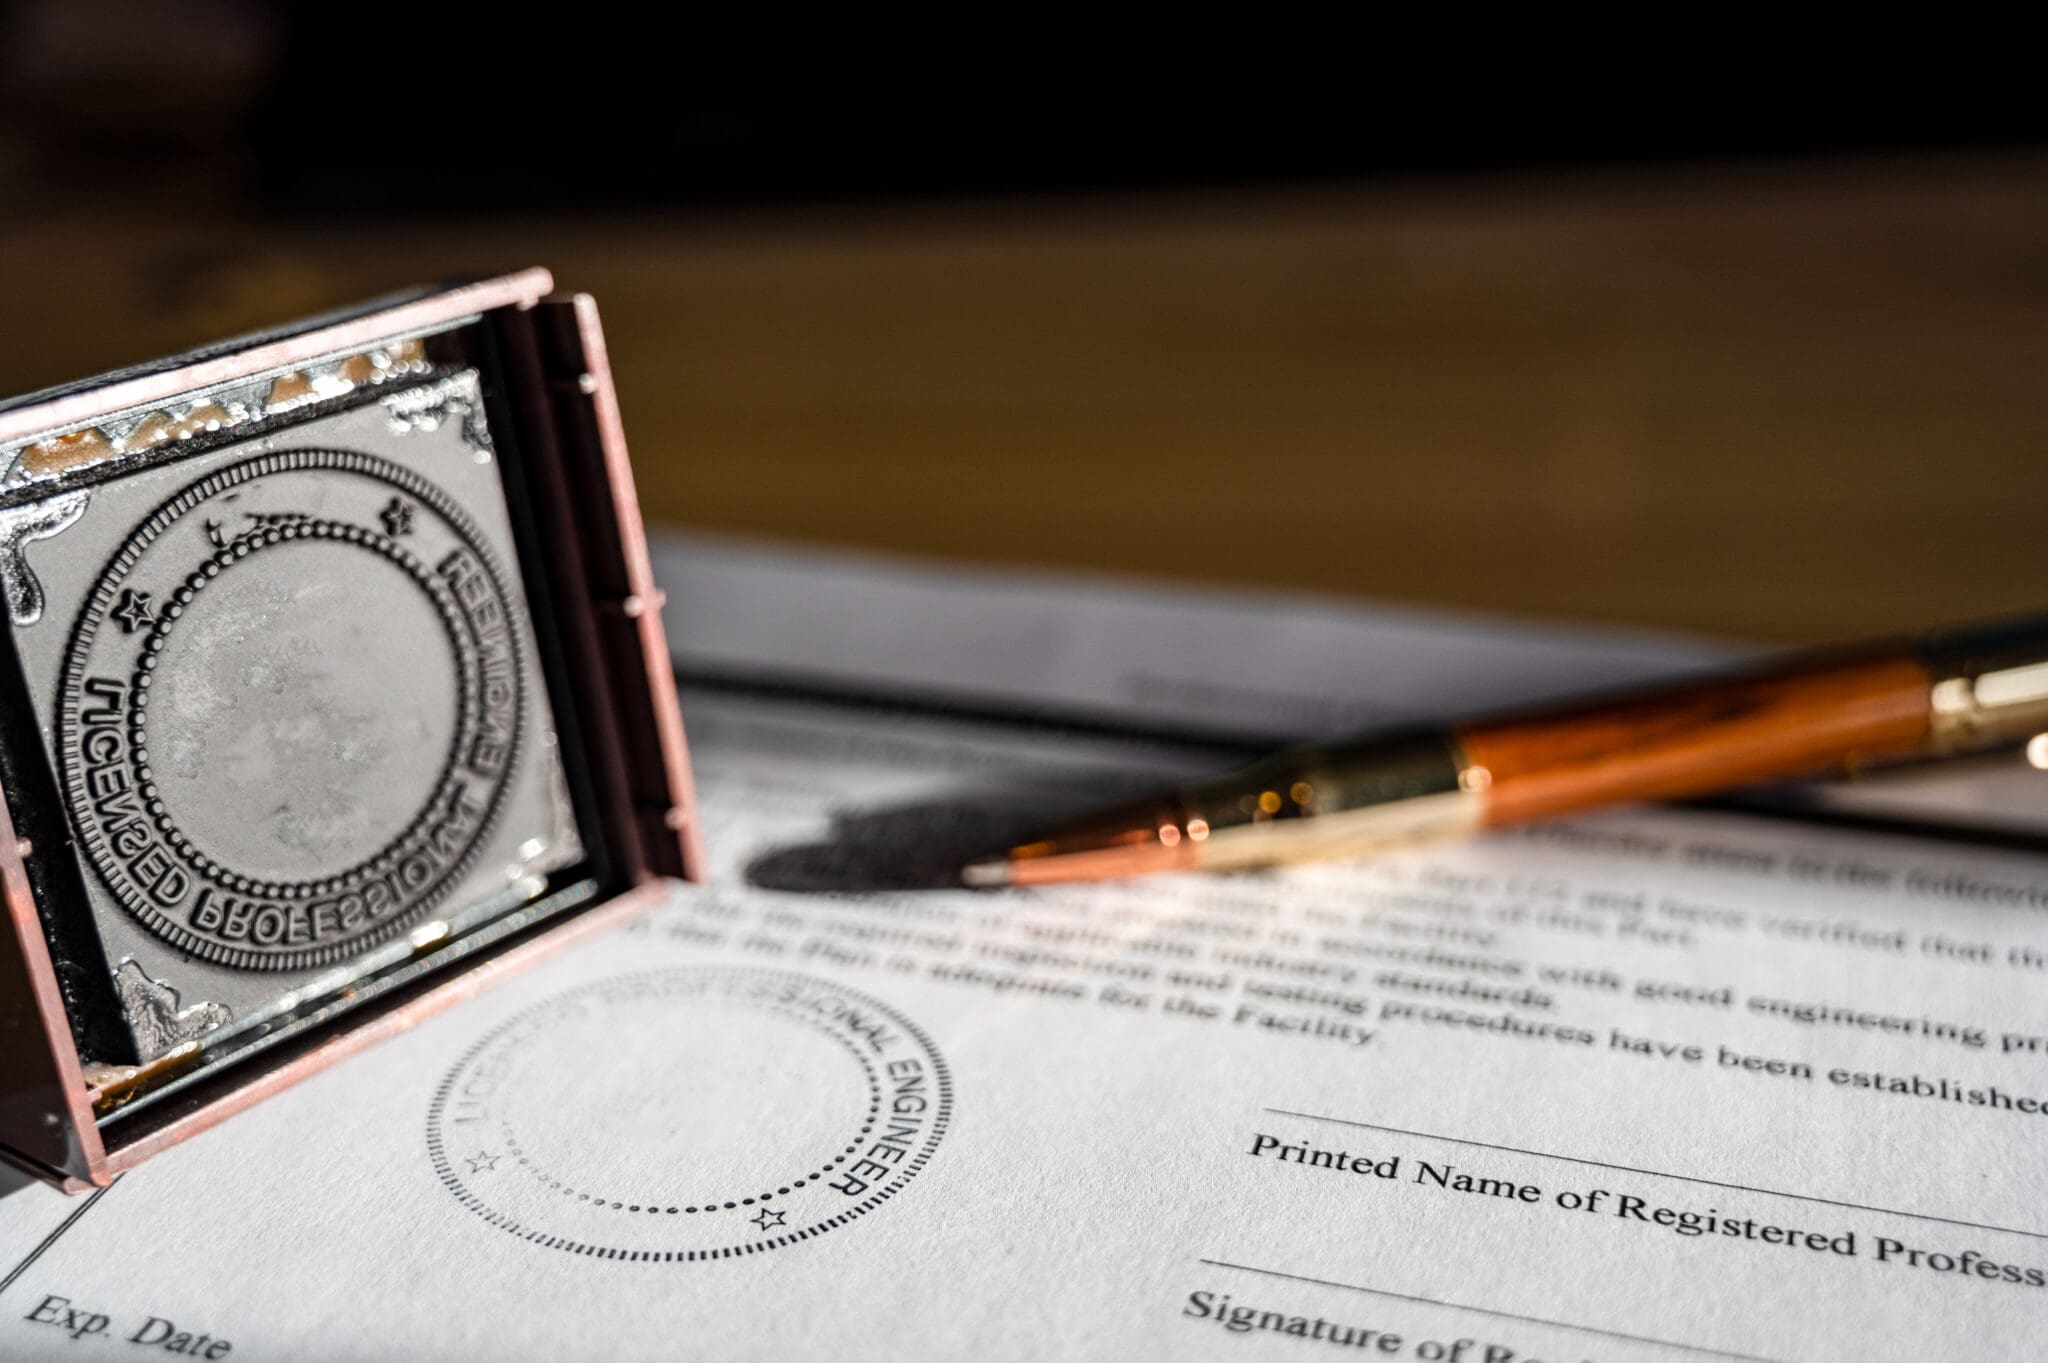 Can Professional Licensing Boards See Expunged Criminal Records?